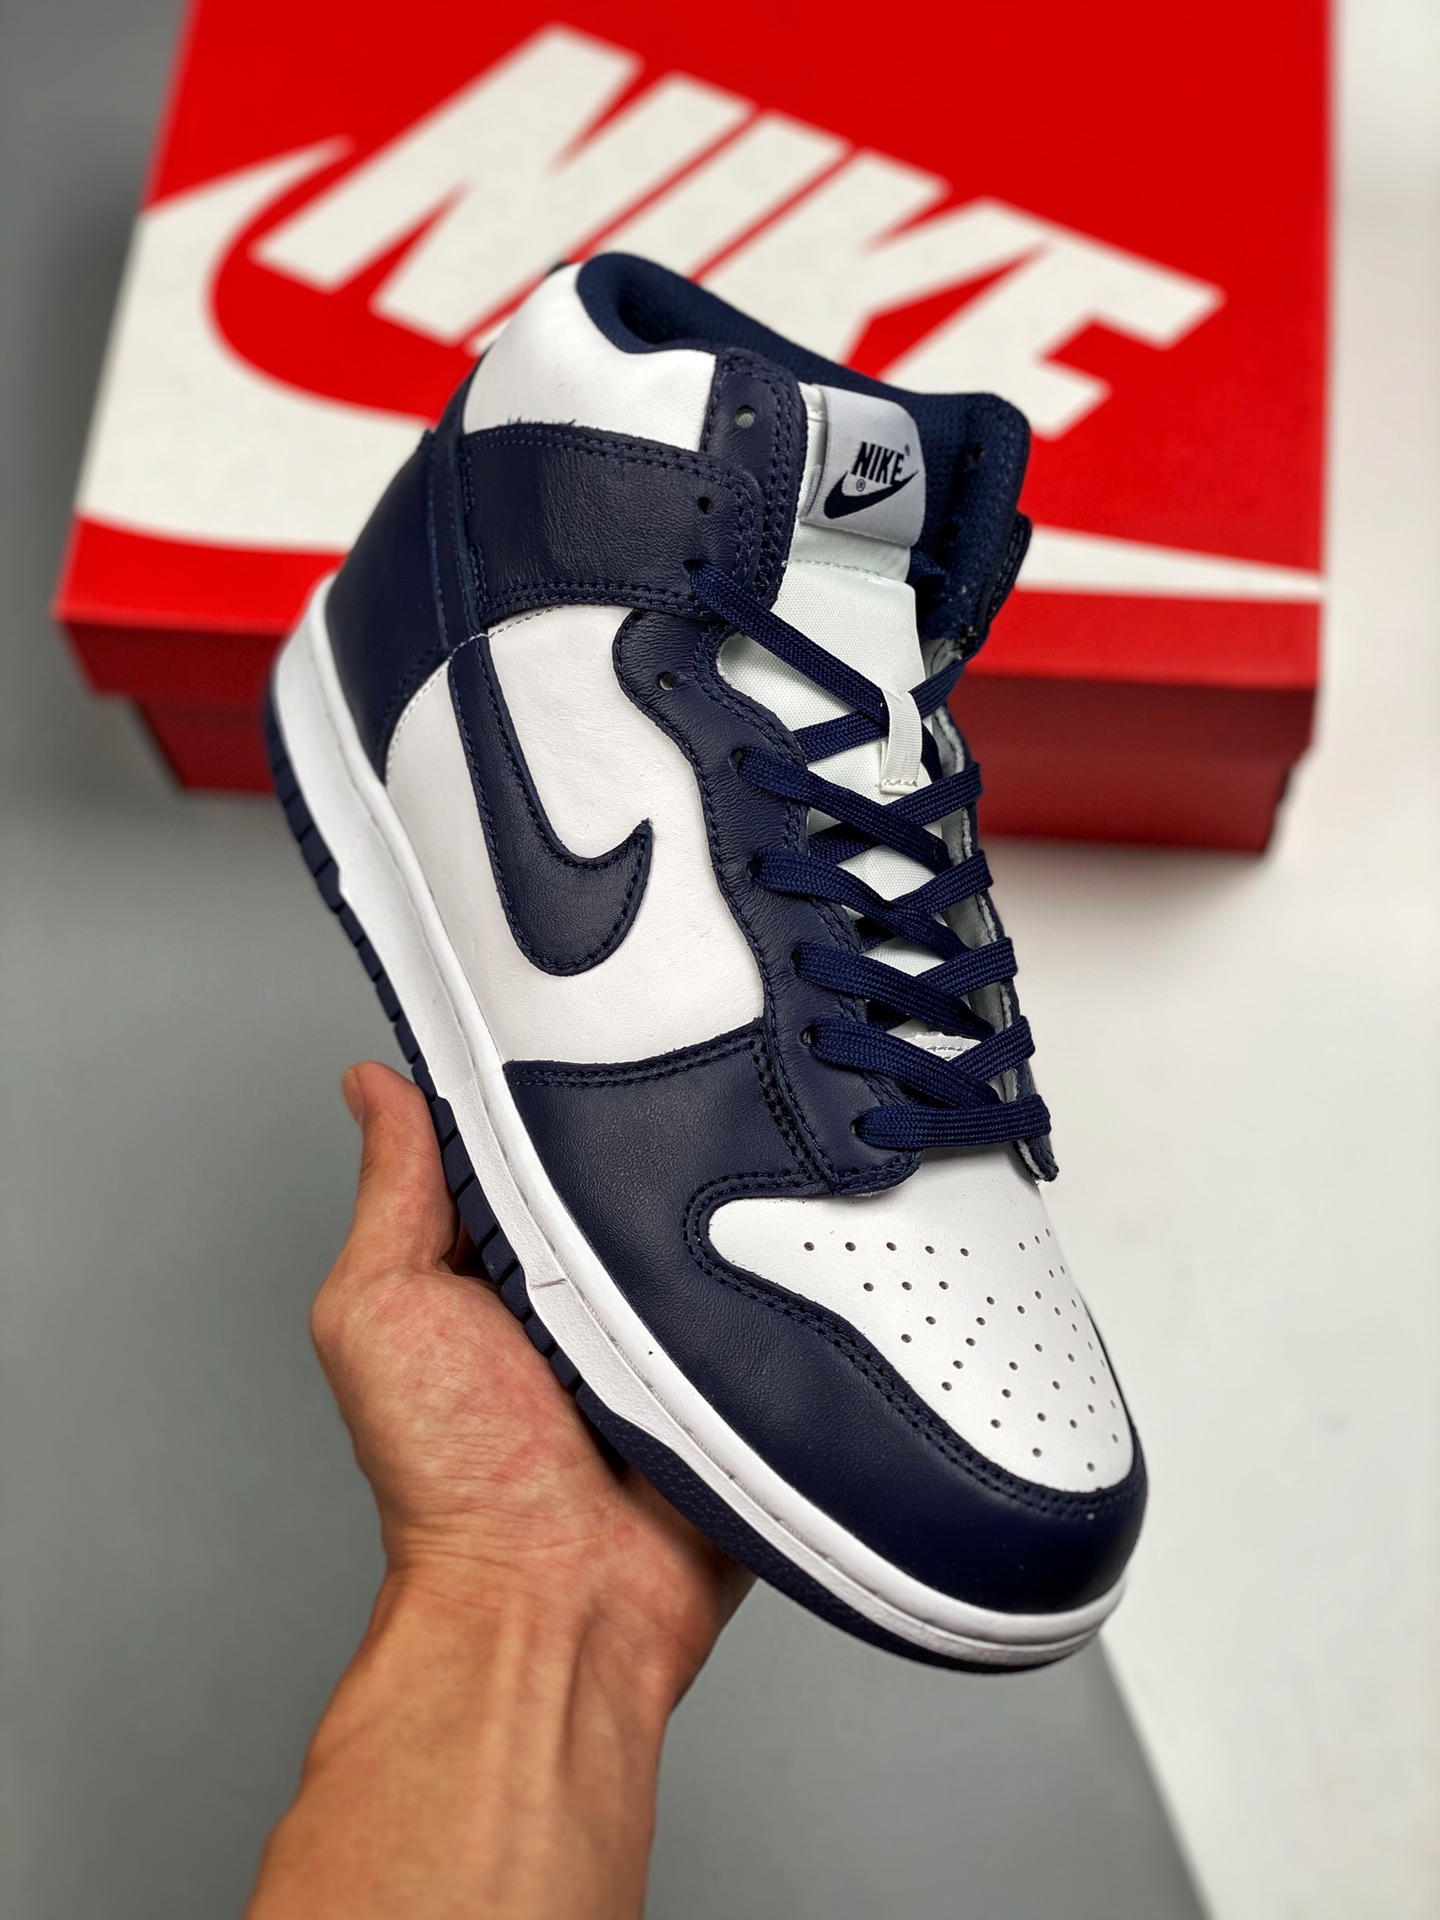 Nike Dunk High White/Midnight Navy-White Shoes